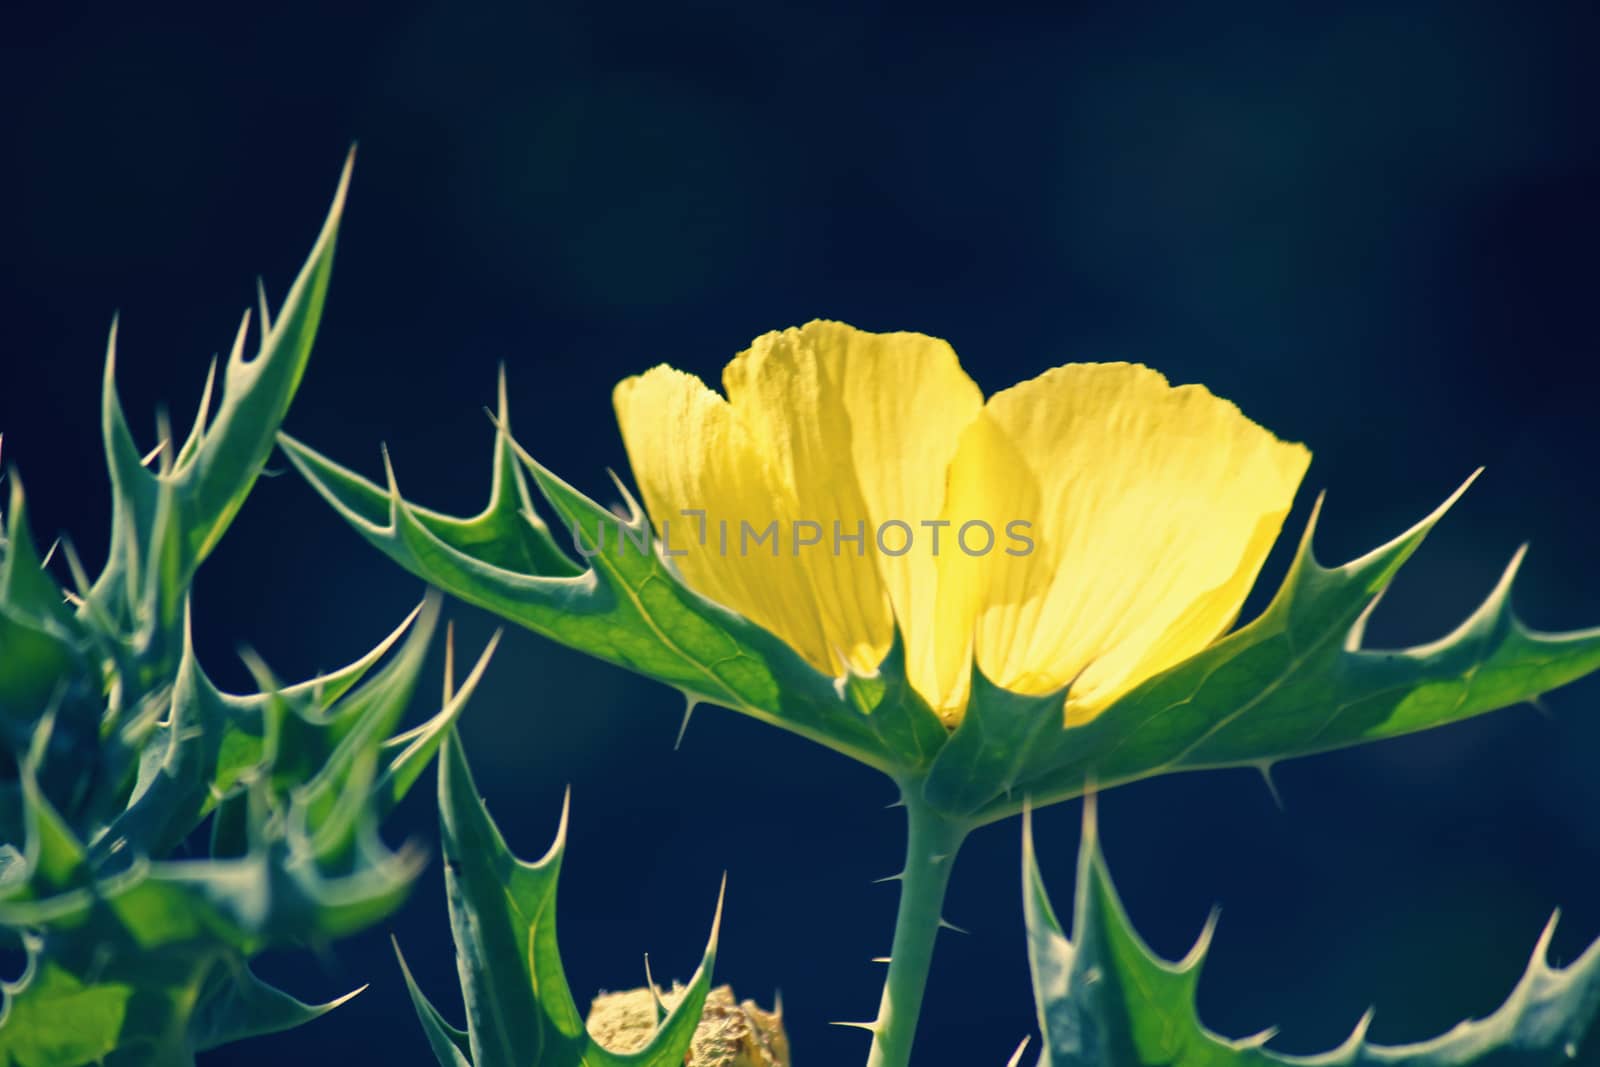 Argemone mexicana, Mexican poppy, Mexican prickly poppy by yands